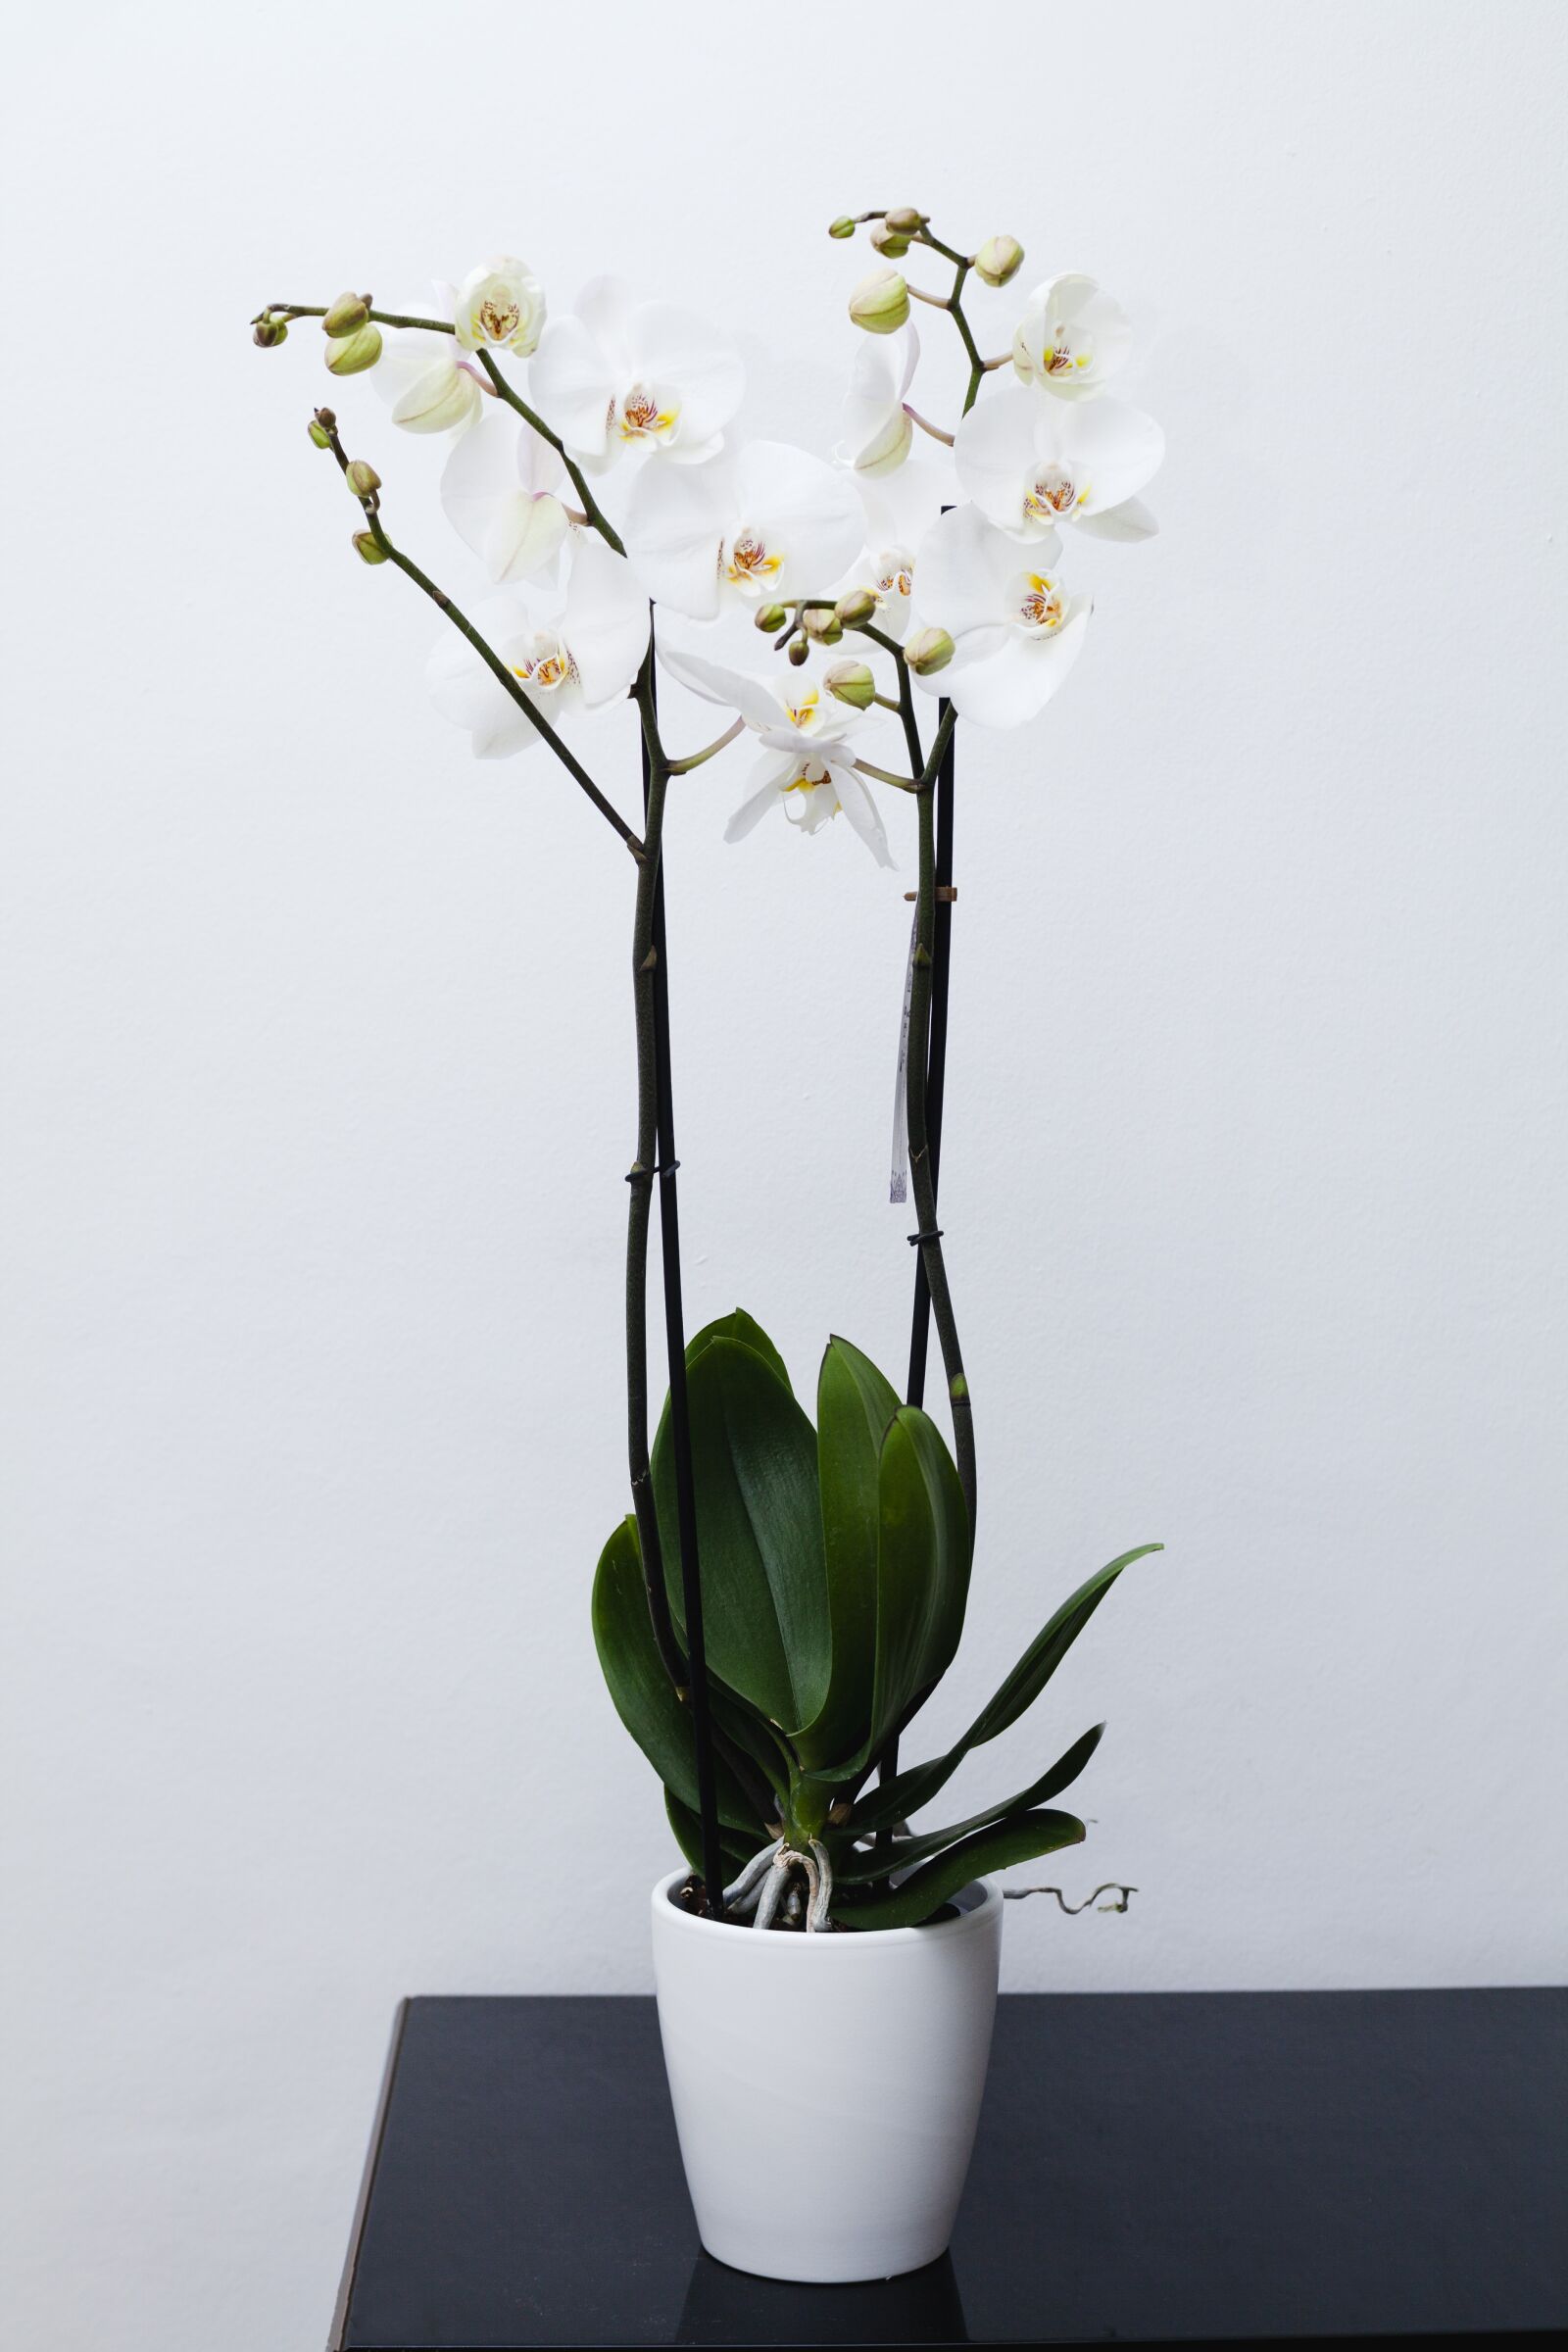 ZEISS Planar T* 50mm F1.4 sample photo. Orchid, flower, blossom photography